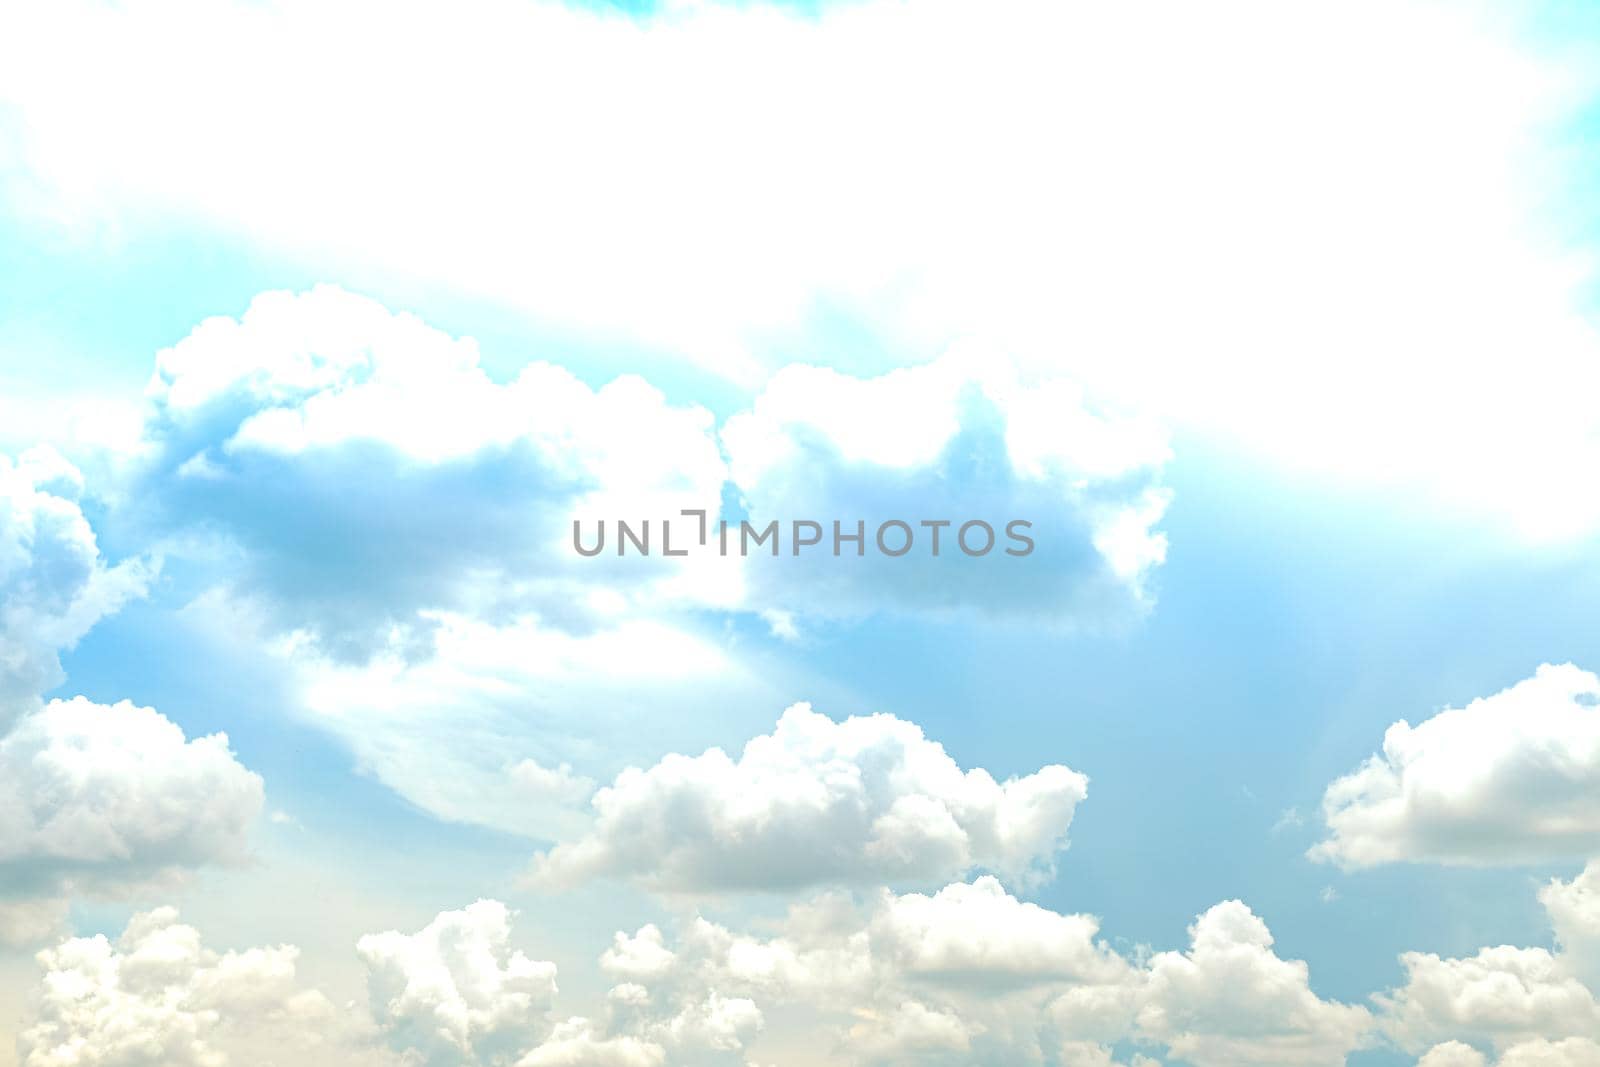 white cumulus clouds on Cloudy blue sky fair weather day abstract nature season background